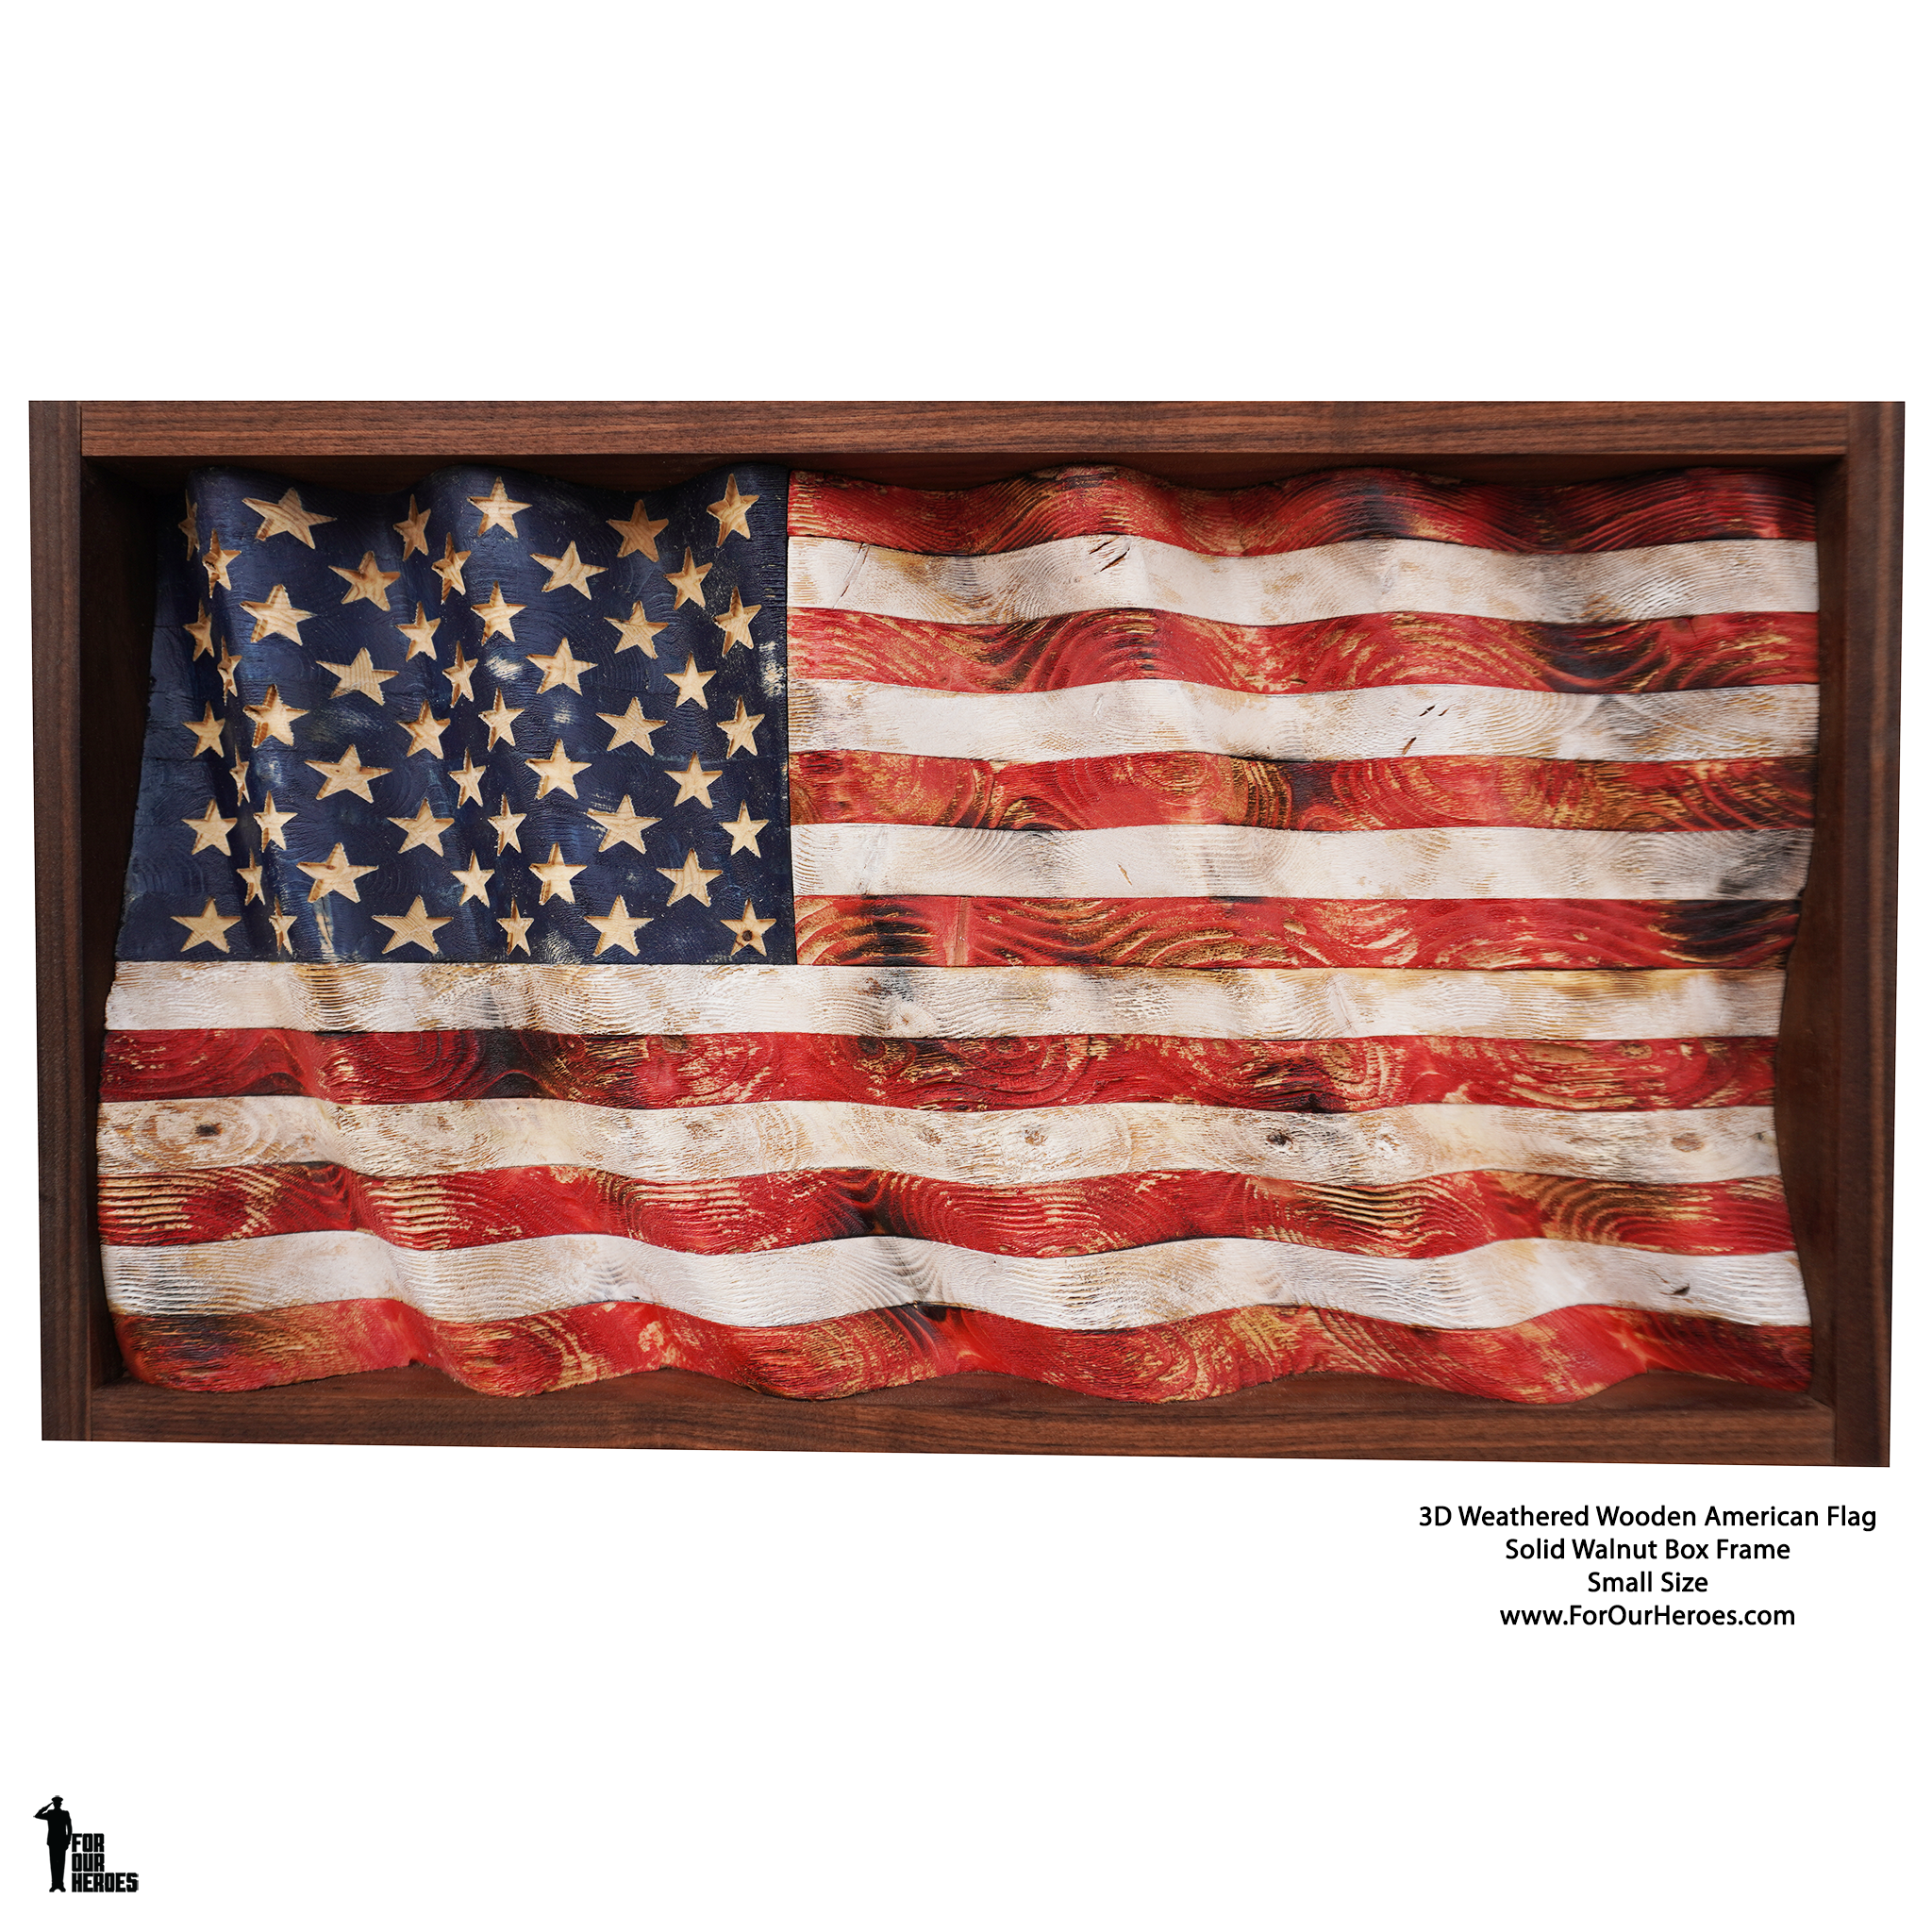 3D WEATHERED & RUSTIC American Flag - 0